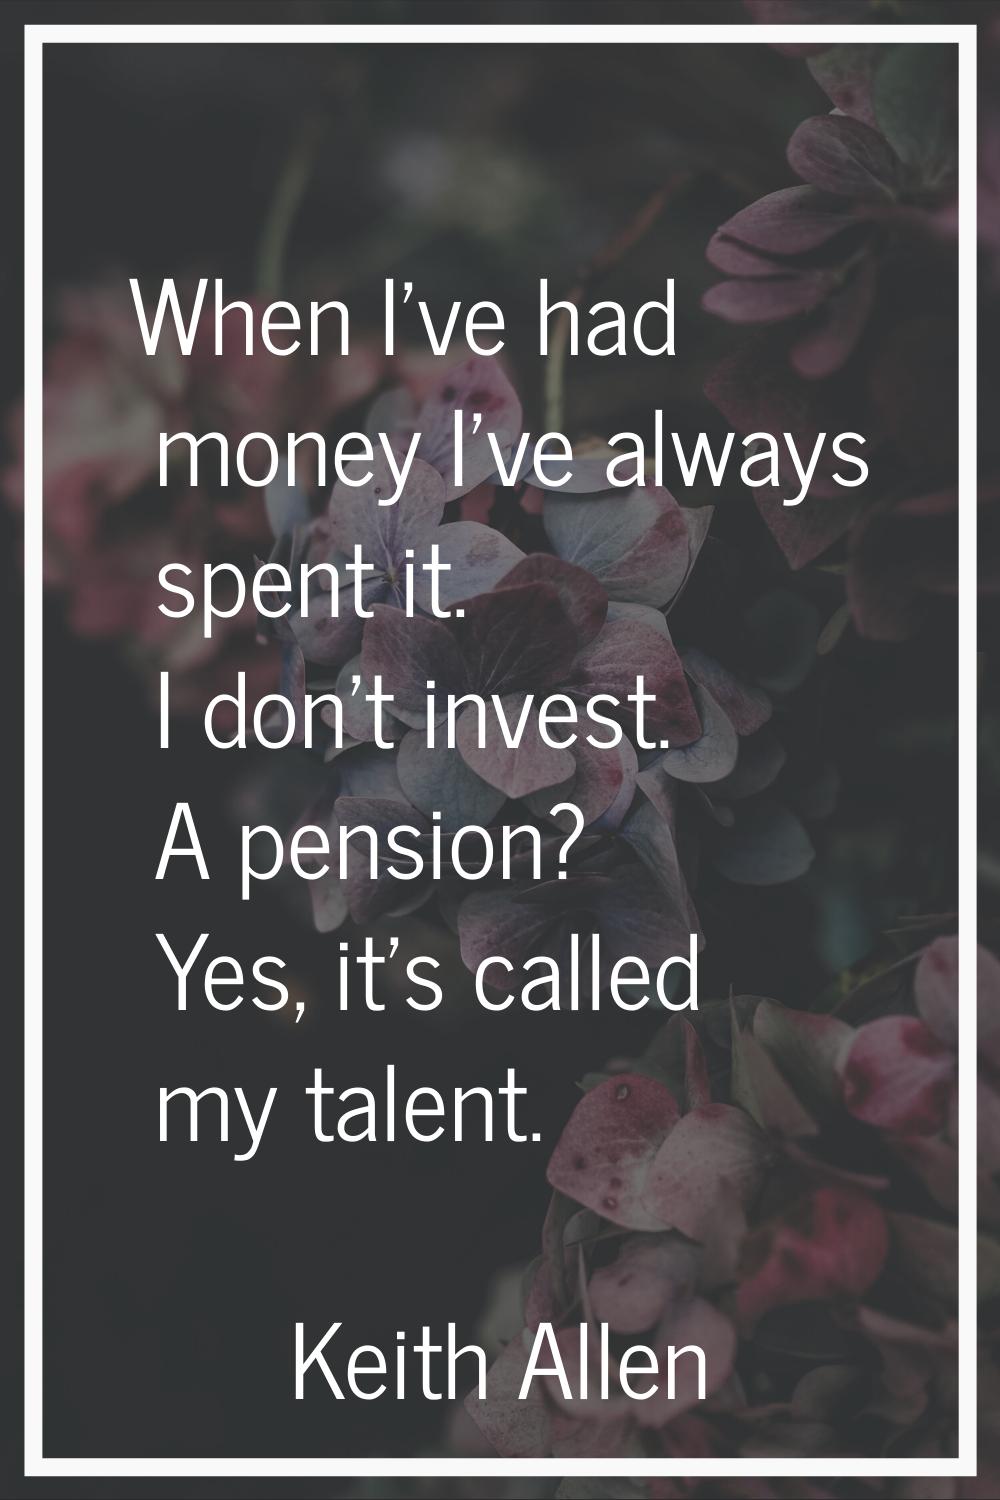 When I've had money I've always spent it. I don't invest. A pension? Yes, it's called my talent.